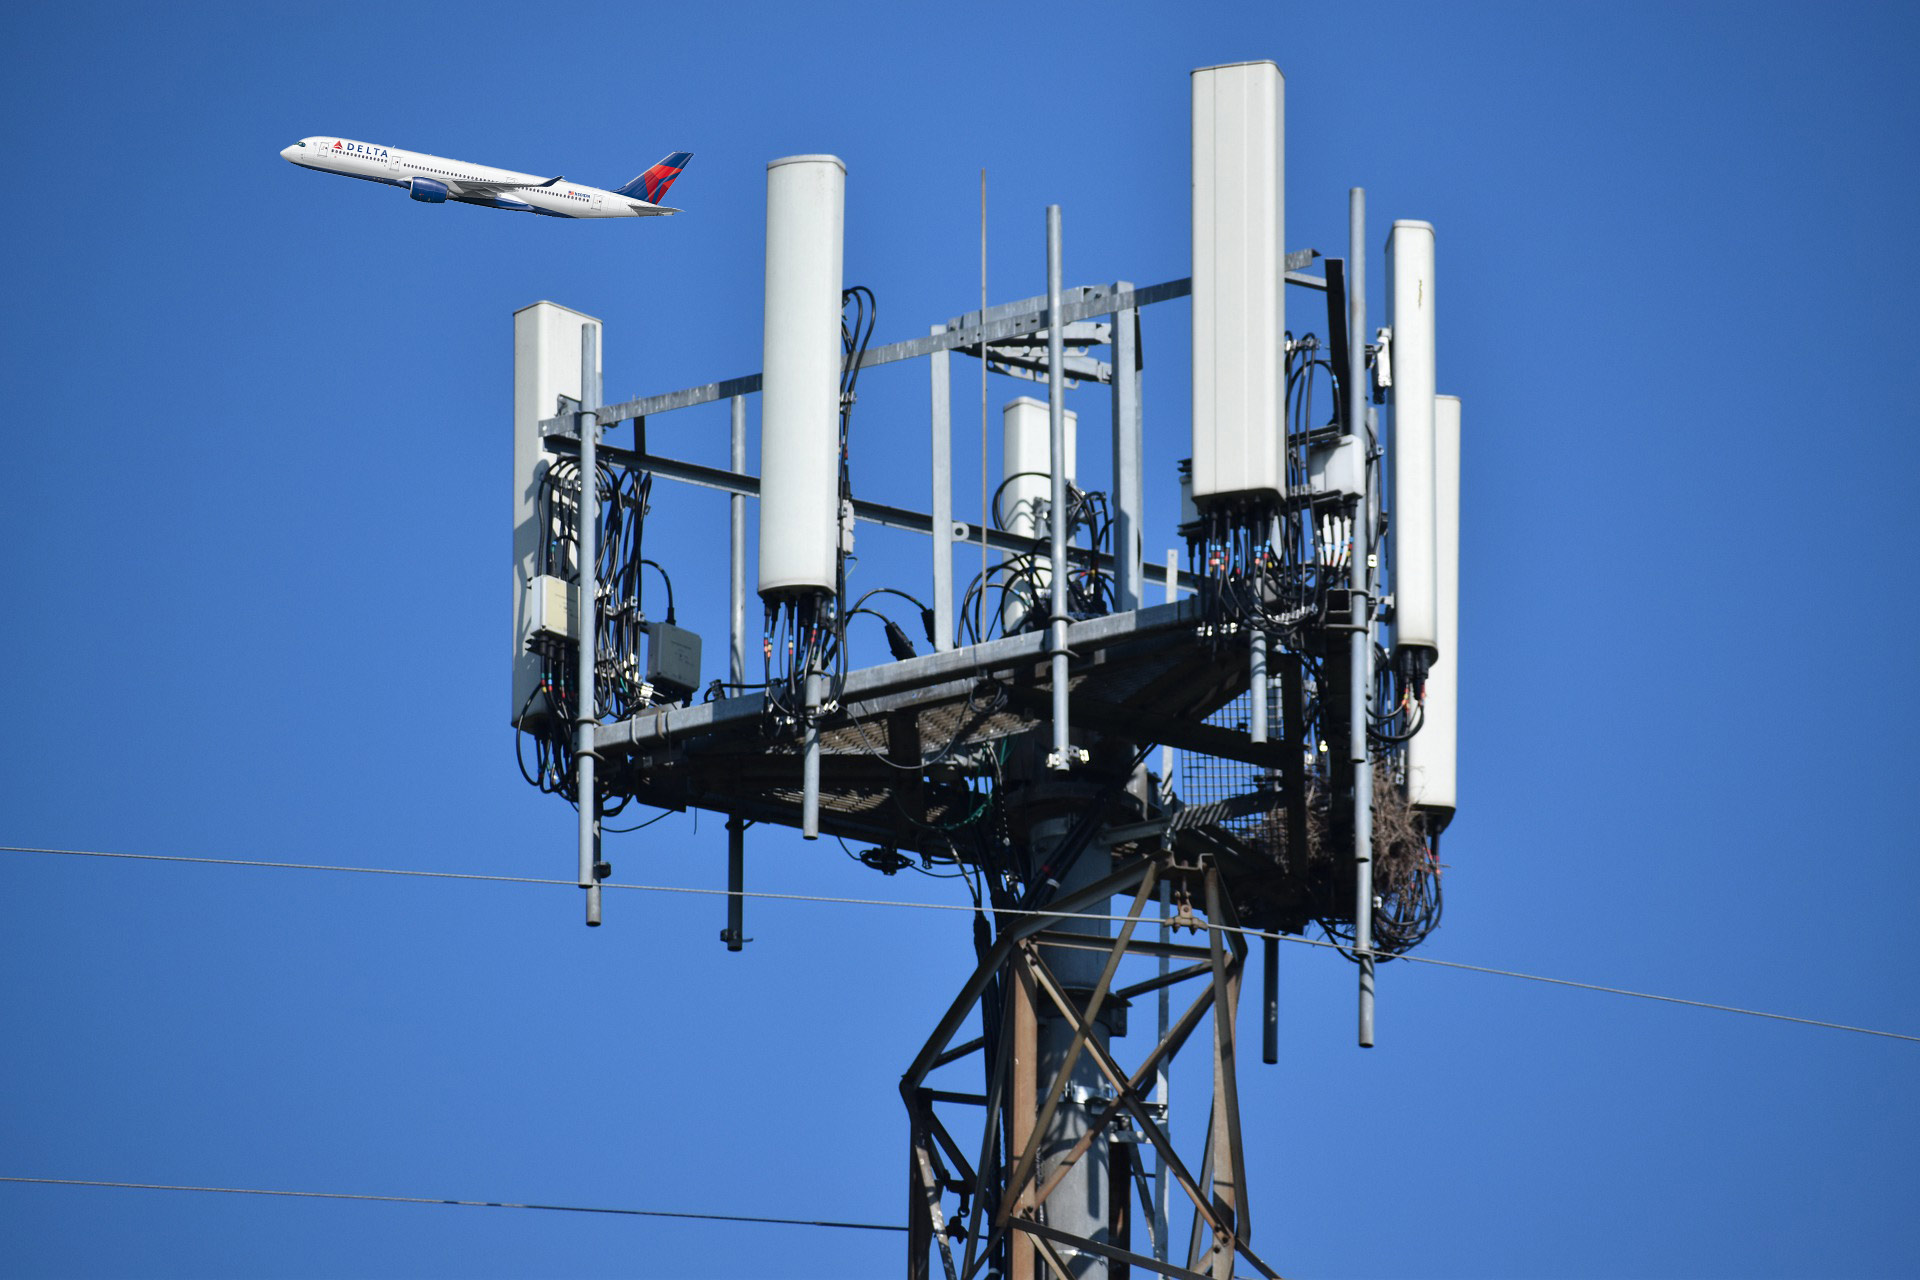 US 5G Roll Out: Launch Day, More Delays, New Notams and FAA Buffers